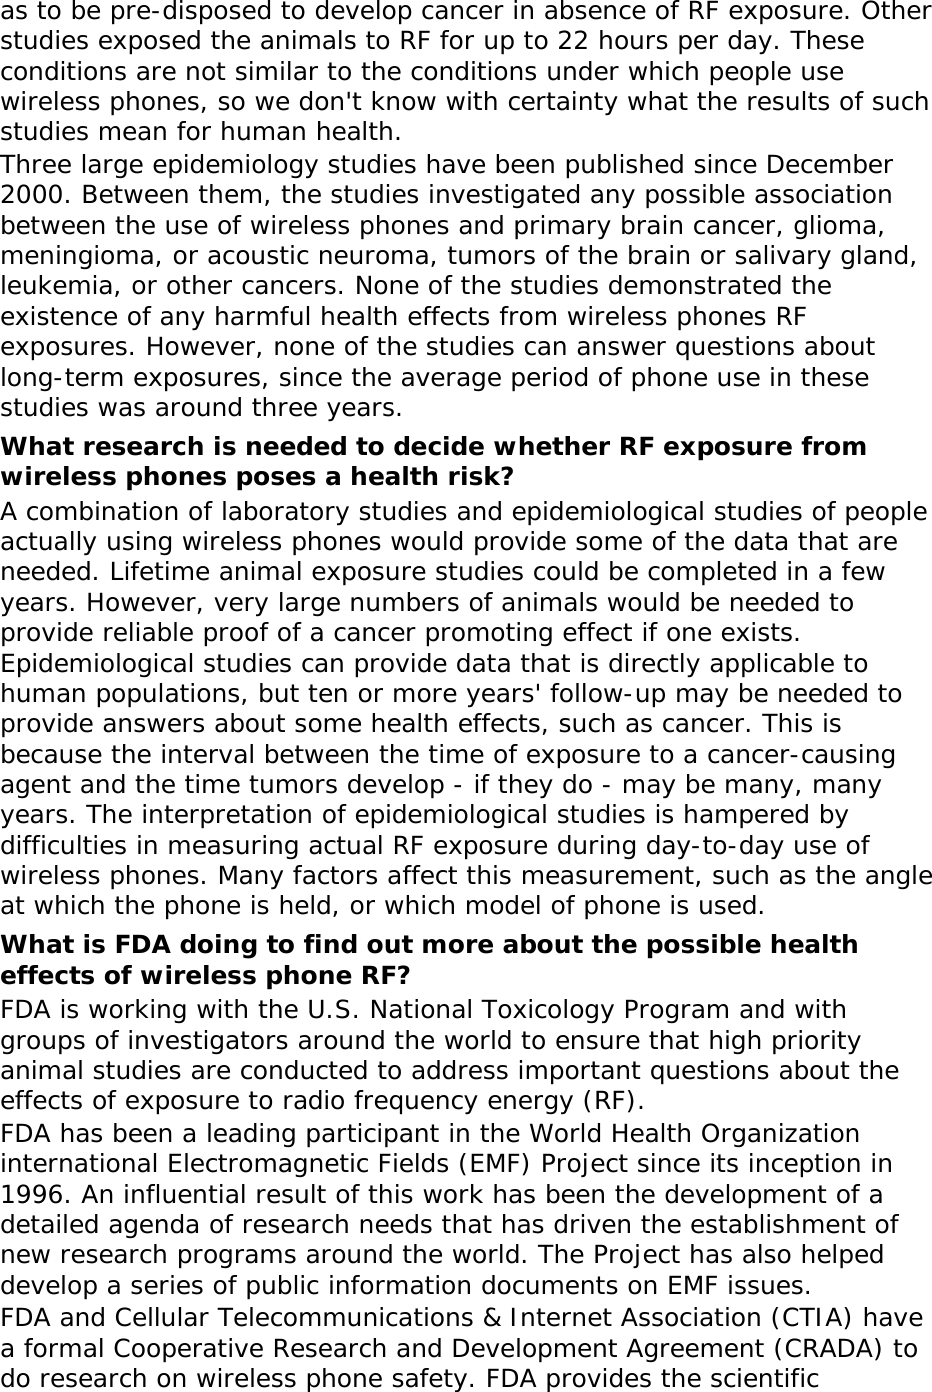 as to be pre-disposed to develop cancer in absence of RF exposure. Other studies exposed the animals to RF for up to 22 hours per day. These conditions are not similar to the conditions under which people use wireless phones, so we don&apos;t know with certainty what the results of such studies mean for human health. Three large epidemiology studies have been published since December 2000. Between them, the studies investigated any possible association between the use of wireless phones and primary brain cancer, glioma, meningioma, or acoustic neuroma, tumors of the brain or salivary gland, leukemia, or other cancers. None of the studies demonstrated the existence of any harmful health effects from wireless phones RF exposures. However, none of the studies can answer questions about long-term exposures, since the average period of phone use in these studies was around three years. What research is needed to decide whether RF exposure from wireless phones poses a health risk? A combination of laboratory studies and epidemiological studies of people actually using wireless phones would provide some of the data that are needed. Lifetime animal exposure studies could be completed in a few years. However, very large numbers of animals would be needed to provide reliable proof of a cancer promoting effect if one exists. Epidemiological studies can provide data that is directly applicable to human populations, but ten or more years&apos; follow-up may be needed to provide answers about some health effects, such as cancer. This is because the interval between the time of exposure to a cancer-causing agent and the time tumors develop - if they do - may be many, many years. The interpretation of epidemiological studies is hampered by difficulties in measuring actual RF exposure during day-to-day use of wireless phones. Many factors affect this measurement, such as the angle at which the phone is held, or which model of phone is used. What is FDA doing to find out more about the possible health effects of wireless phone RF? FDA is working with the U.S. National Toxicology Program and with groups of investigators around the world to ensure that high priority animal studies are conducted to address important questions about the effects of exposure to radio frequency energy (RF). FDA has been a leading participant in the World Health Organization international Electromagnetic Fields (EMF) Project since its inception in 1996. An influential result of this work has been the development of a detailed agenda of research needs that has driven the establishment of new research programs around the world. The Project has also helped develop a series of public information documents on EMF issues. FDA and Cellular Telecommunications &amp; Internet Association (CTIA) have a formal Cooperative Research and Development Agreement (CRADA) to do research on wireless phone safety. FDA provides the scientific 